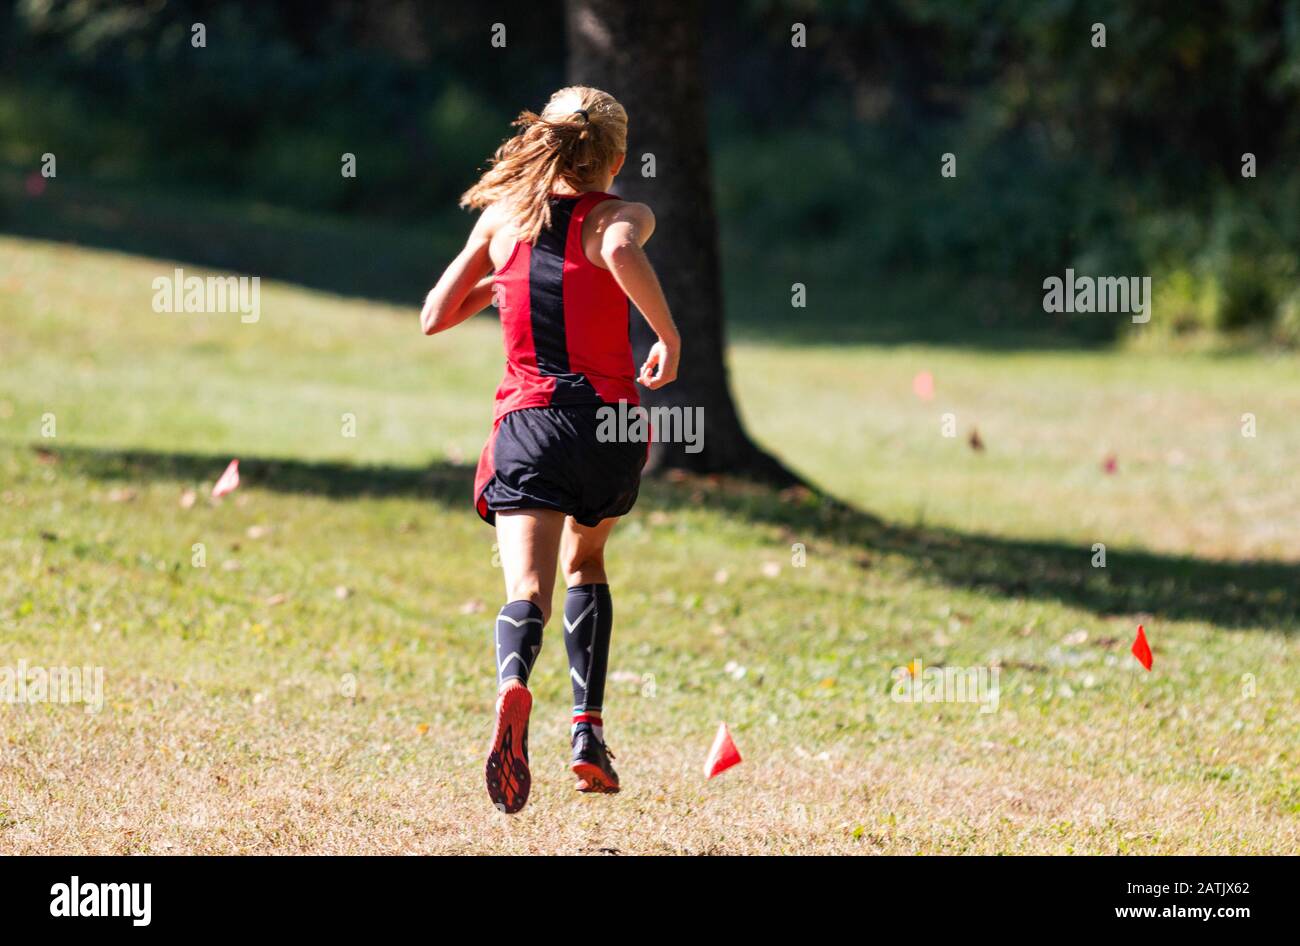 Rear view of the leader of a girls cross country race following the small red flags marking the course. Stock Photo